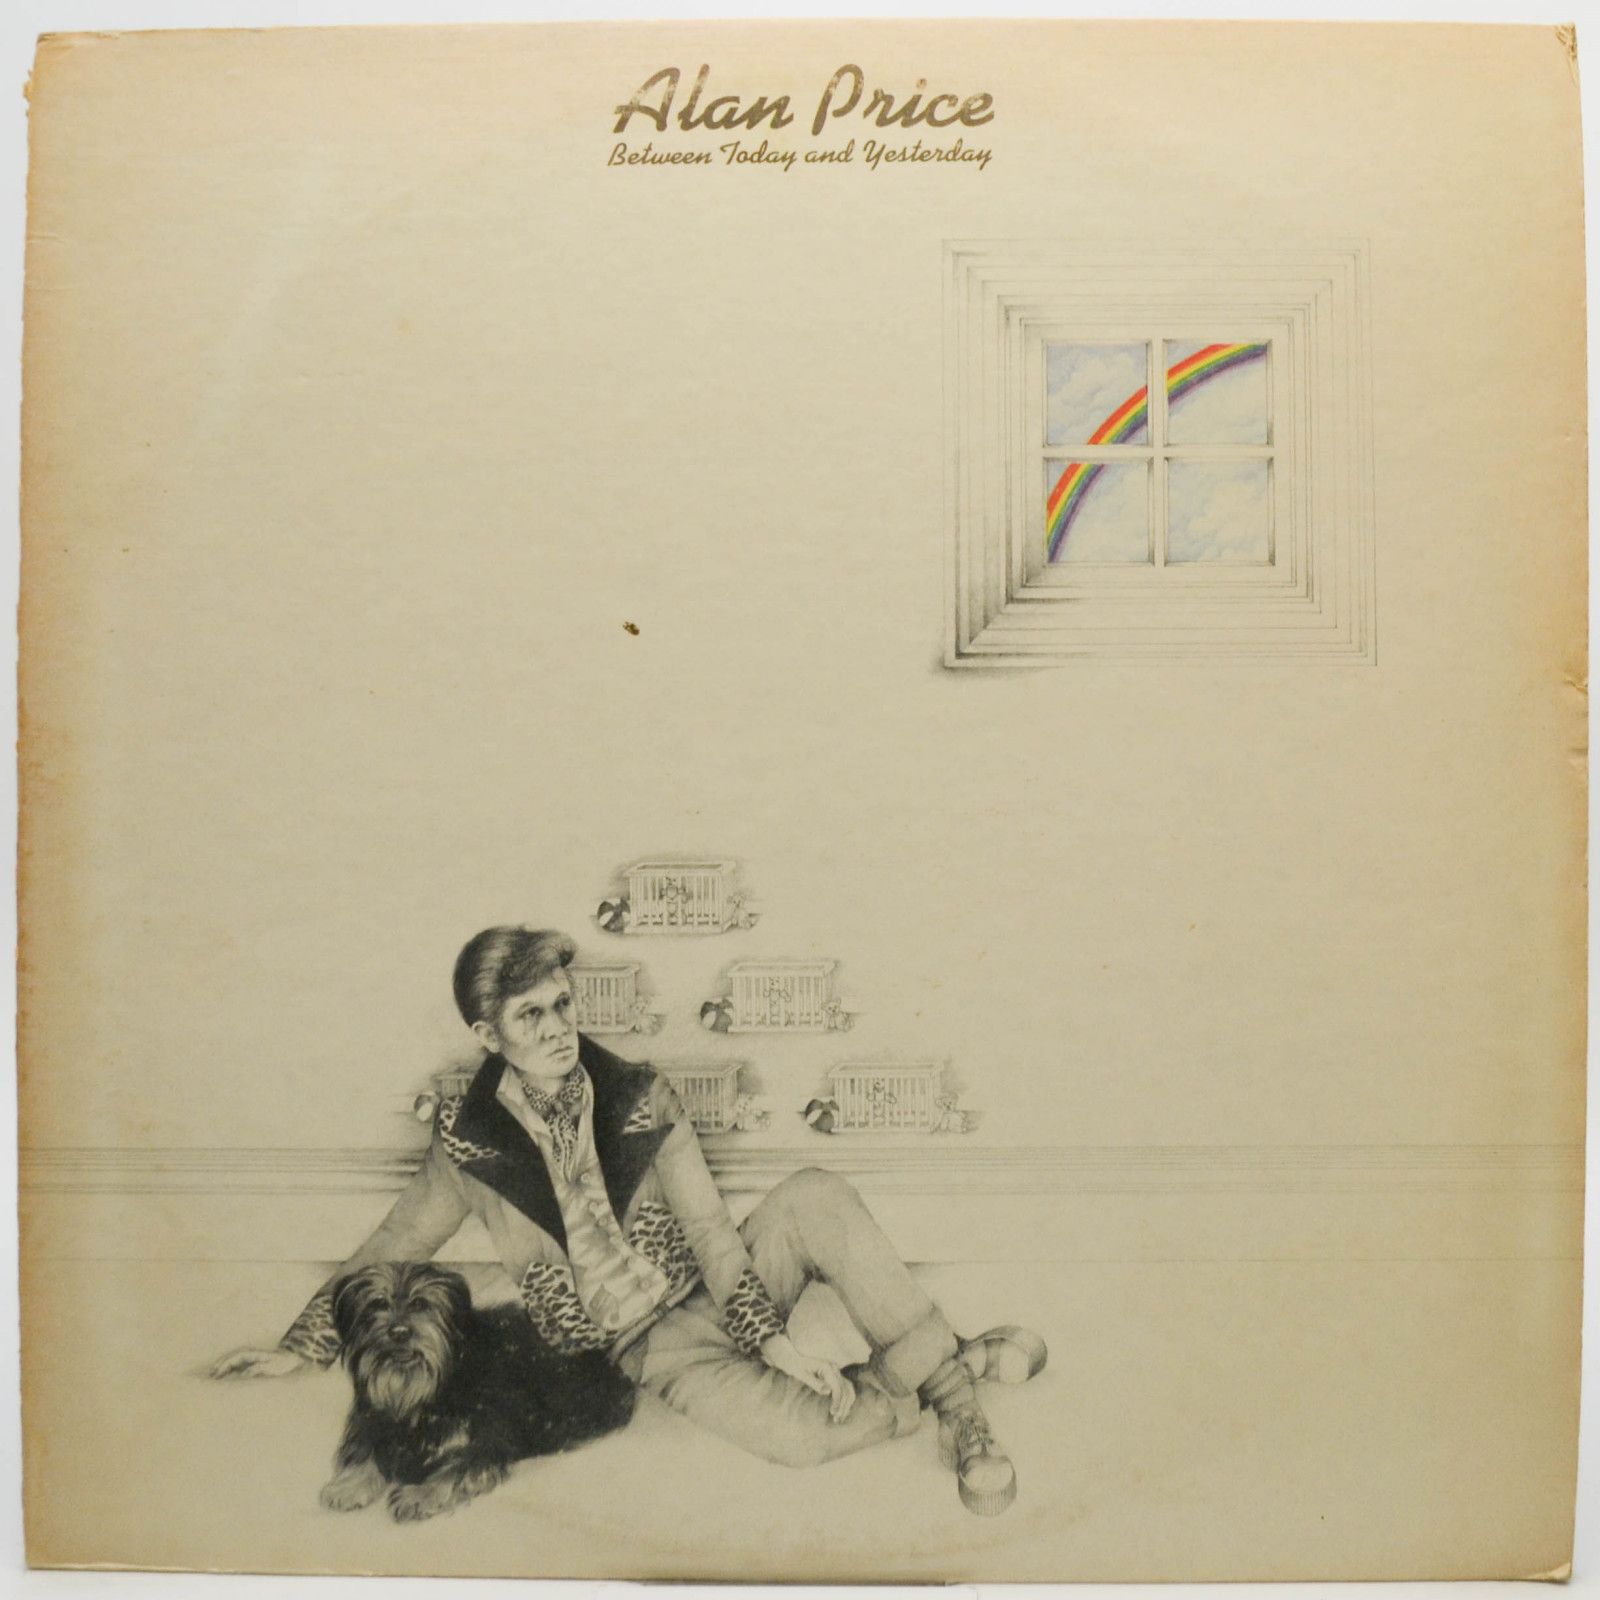 Alan Price — Between Today And Yesterday (USA), 1974